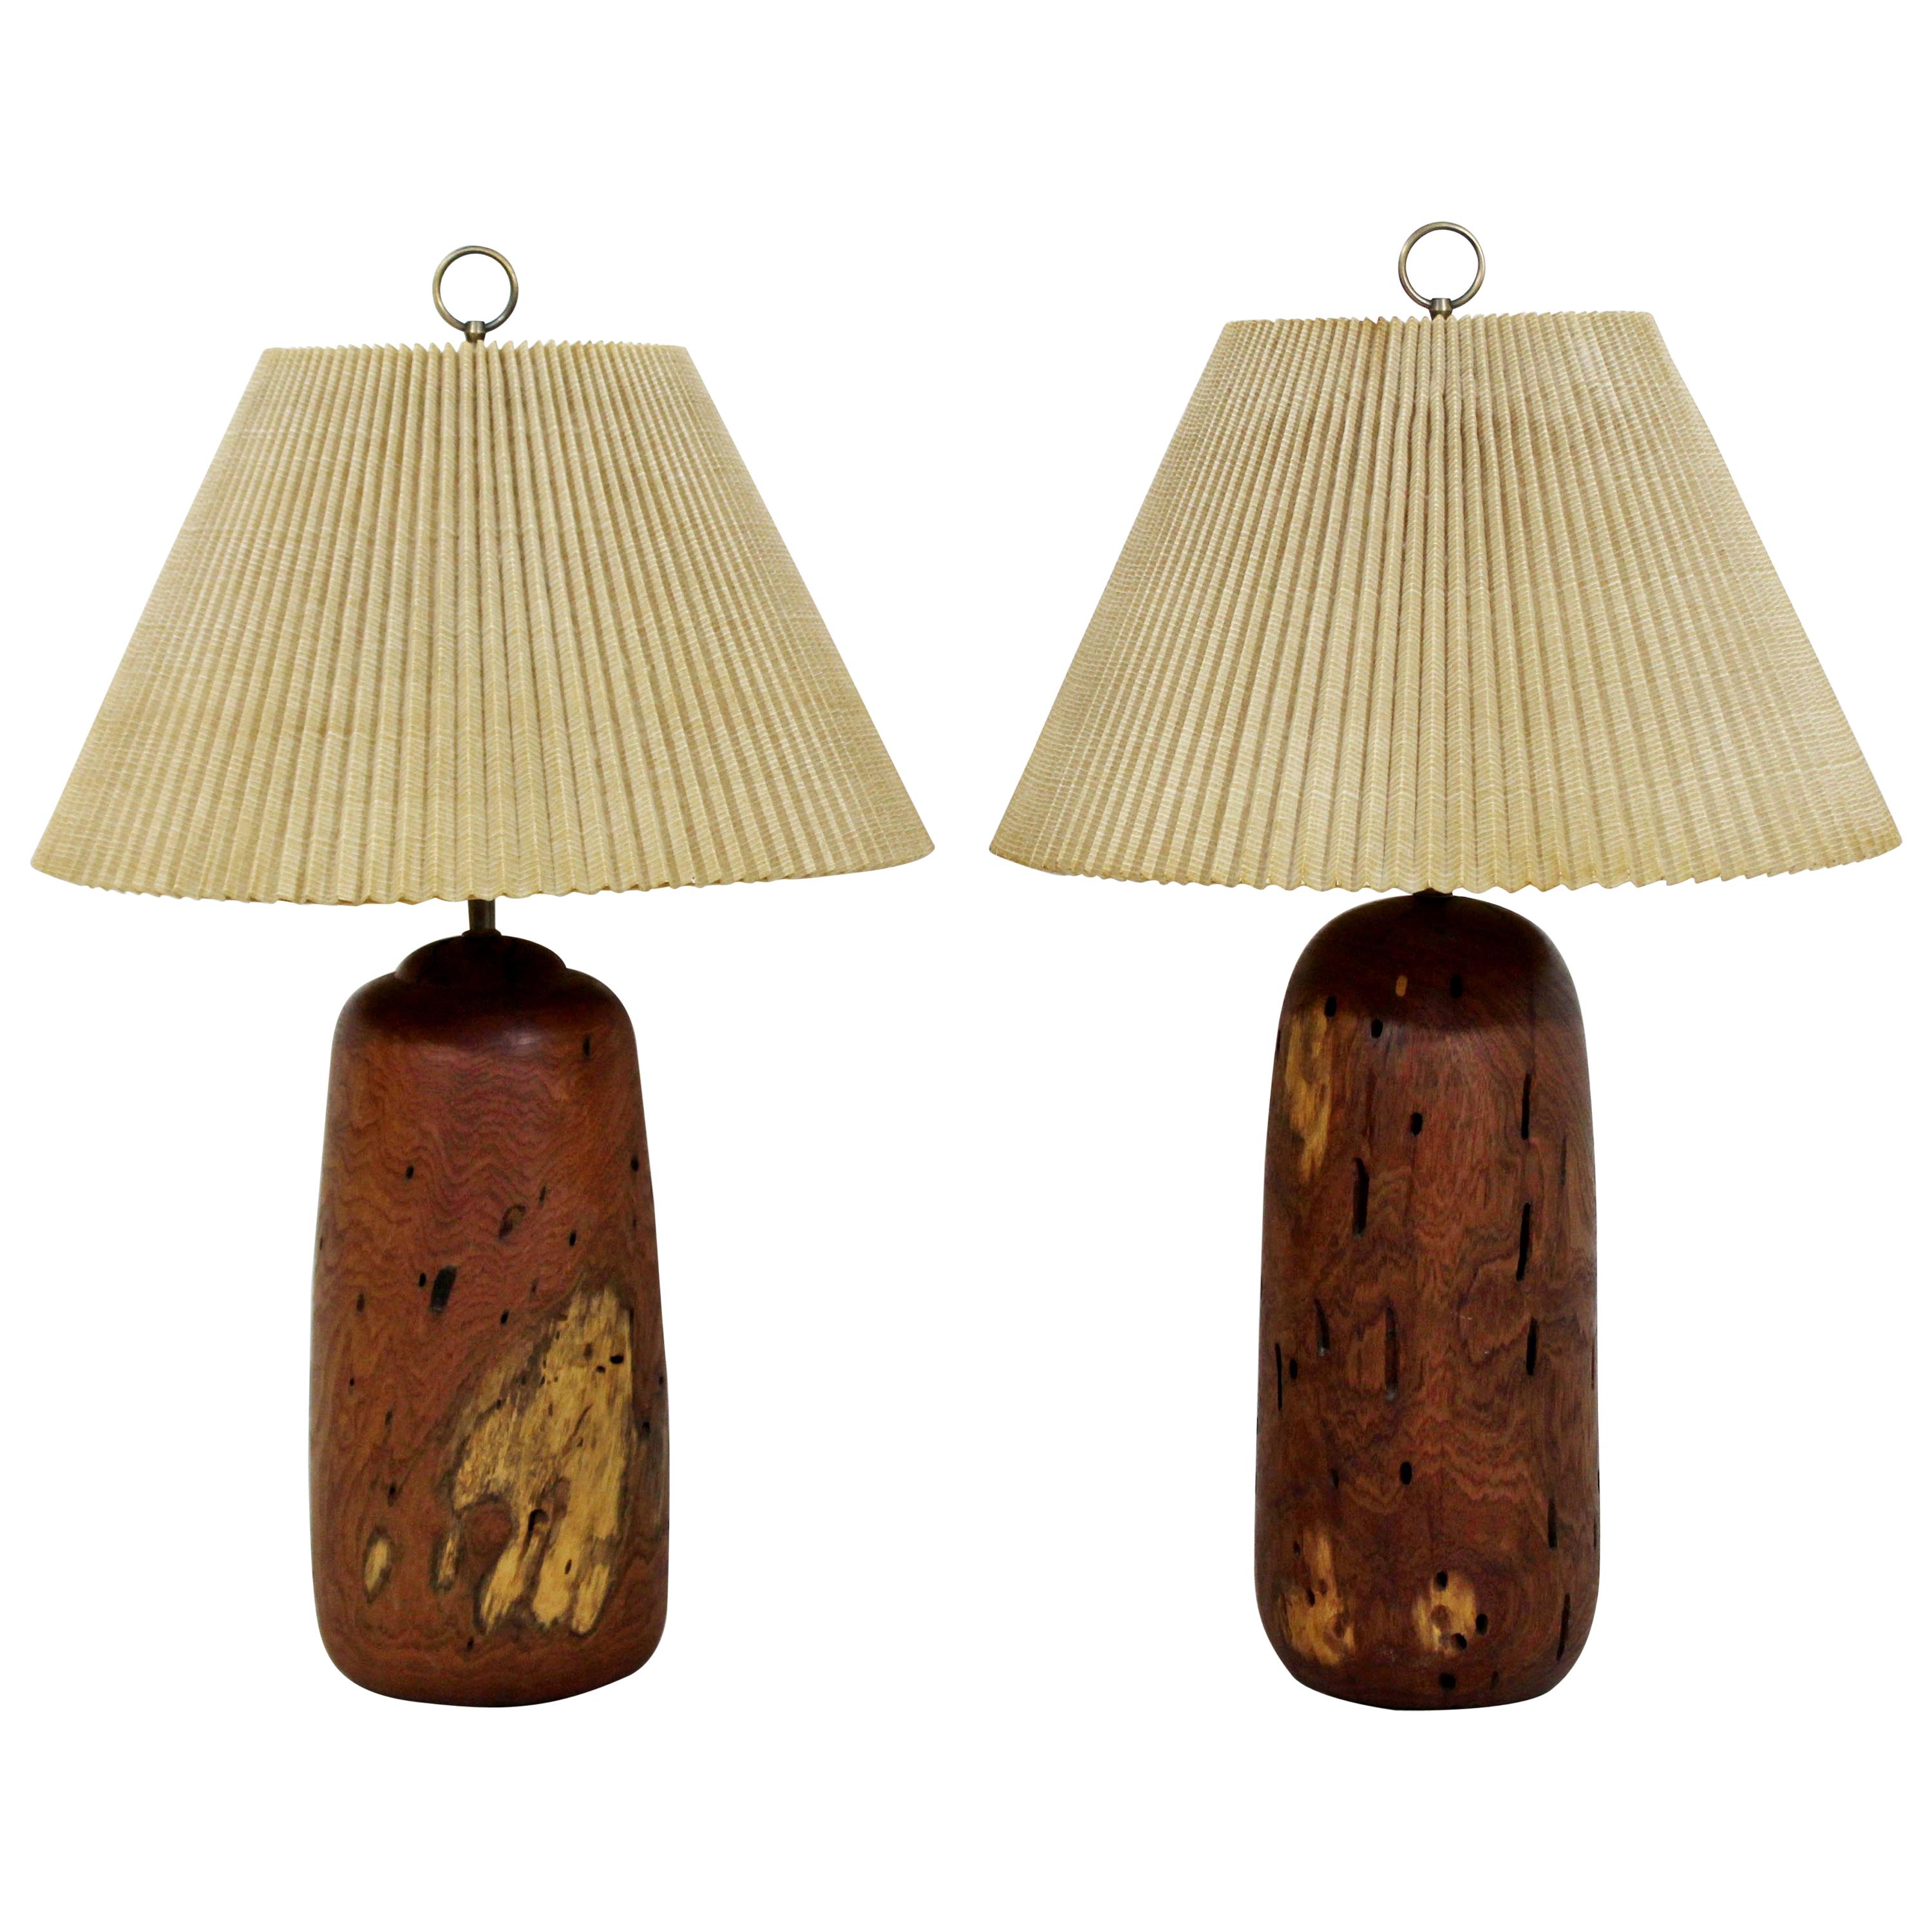 Mid-Century Modern Pair of Turned Wood Table Dimmer Lamps, 1960s